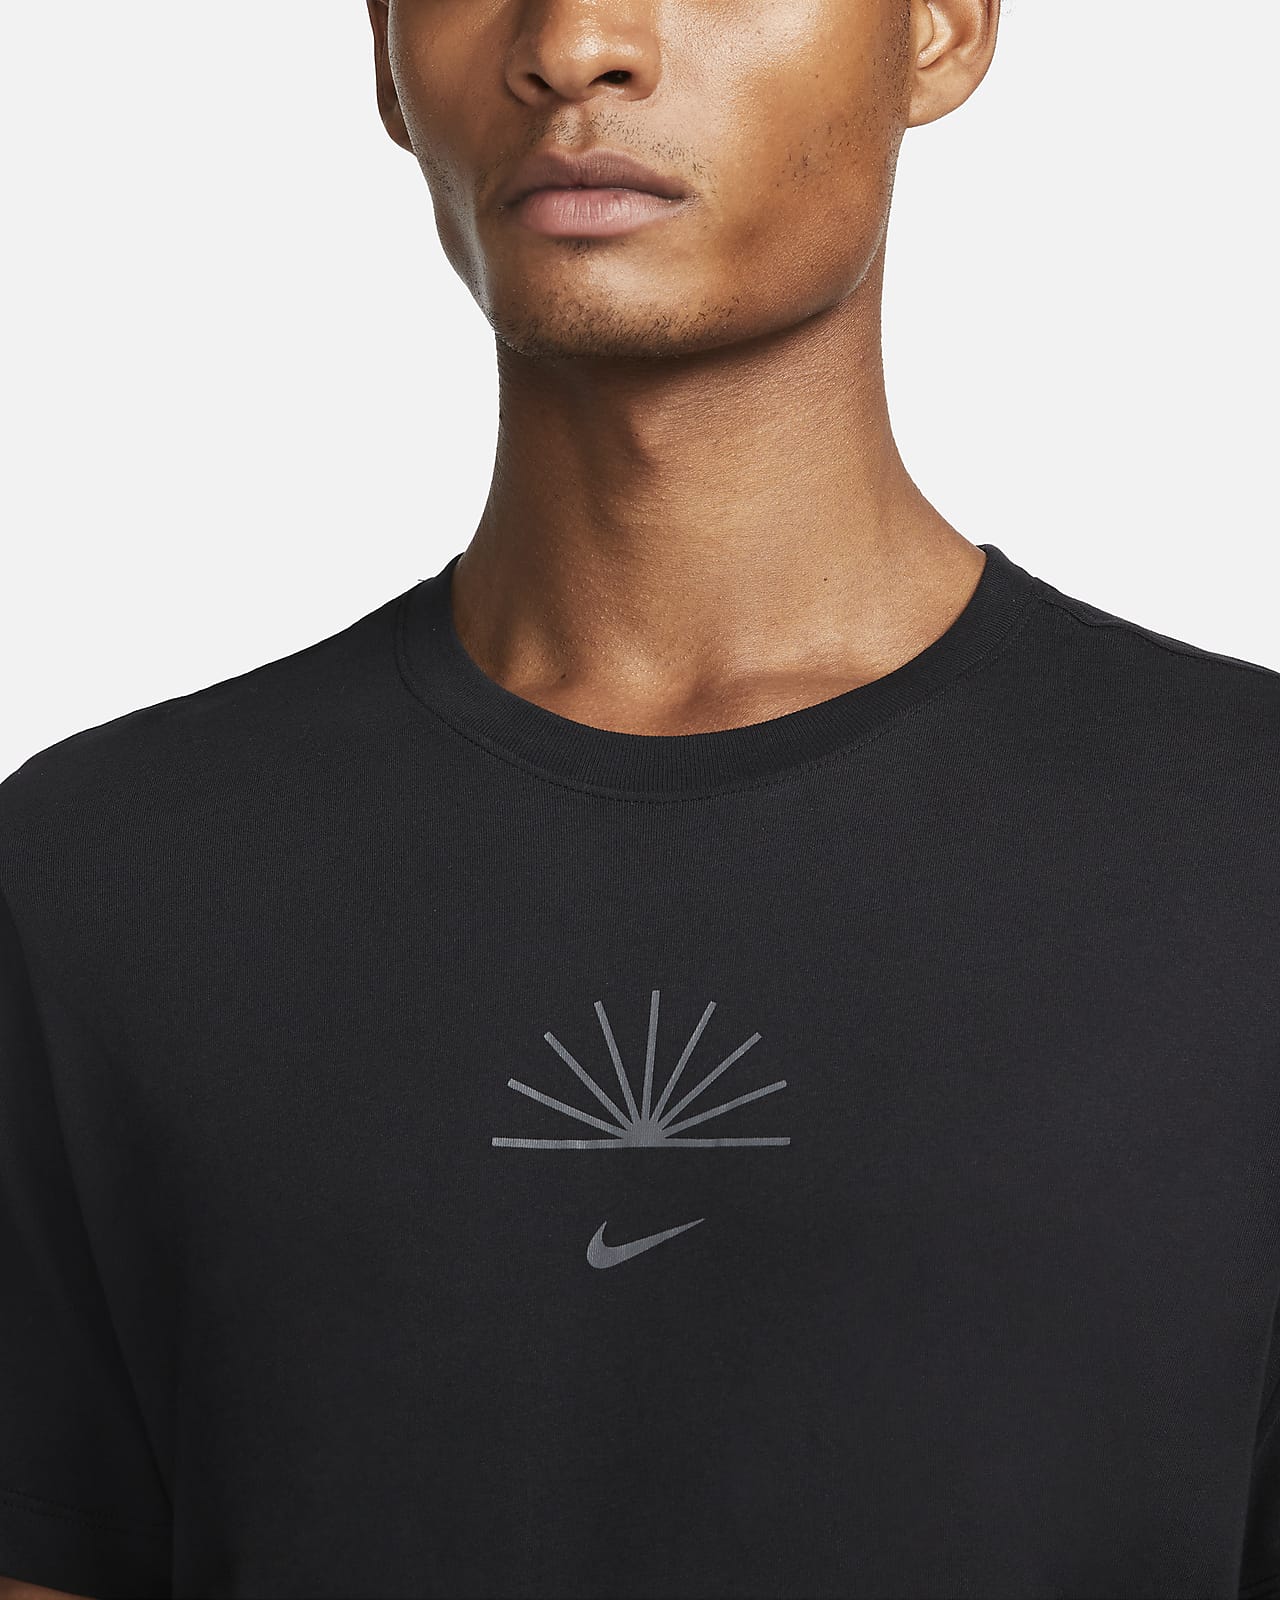 Men's Nike yoga shirt Dry-Fit T-Shirt Gray new with tags CN9822-077 yoga  gray 